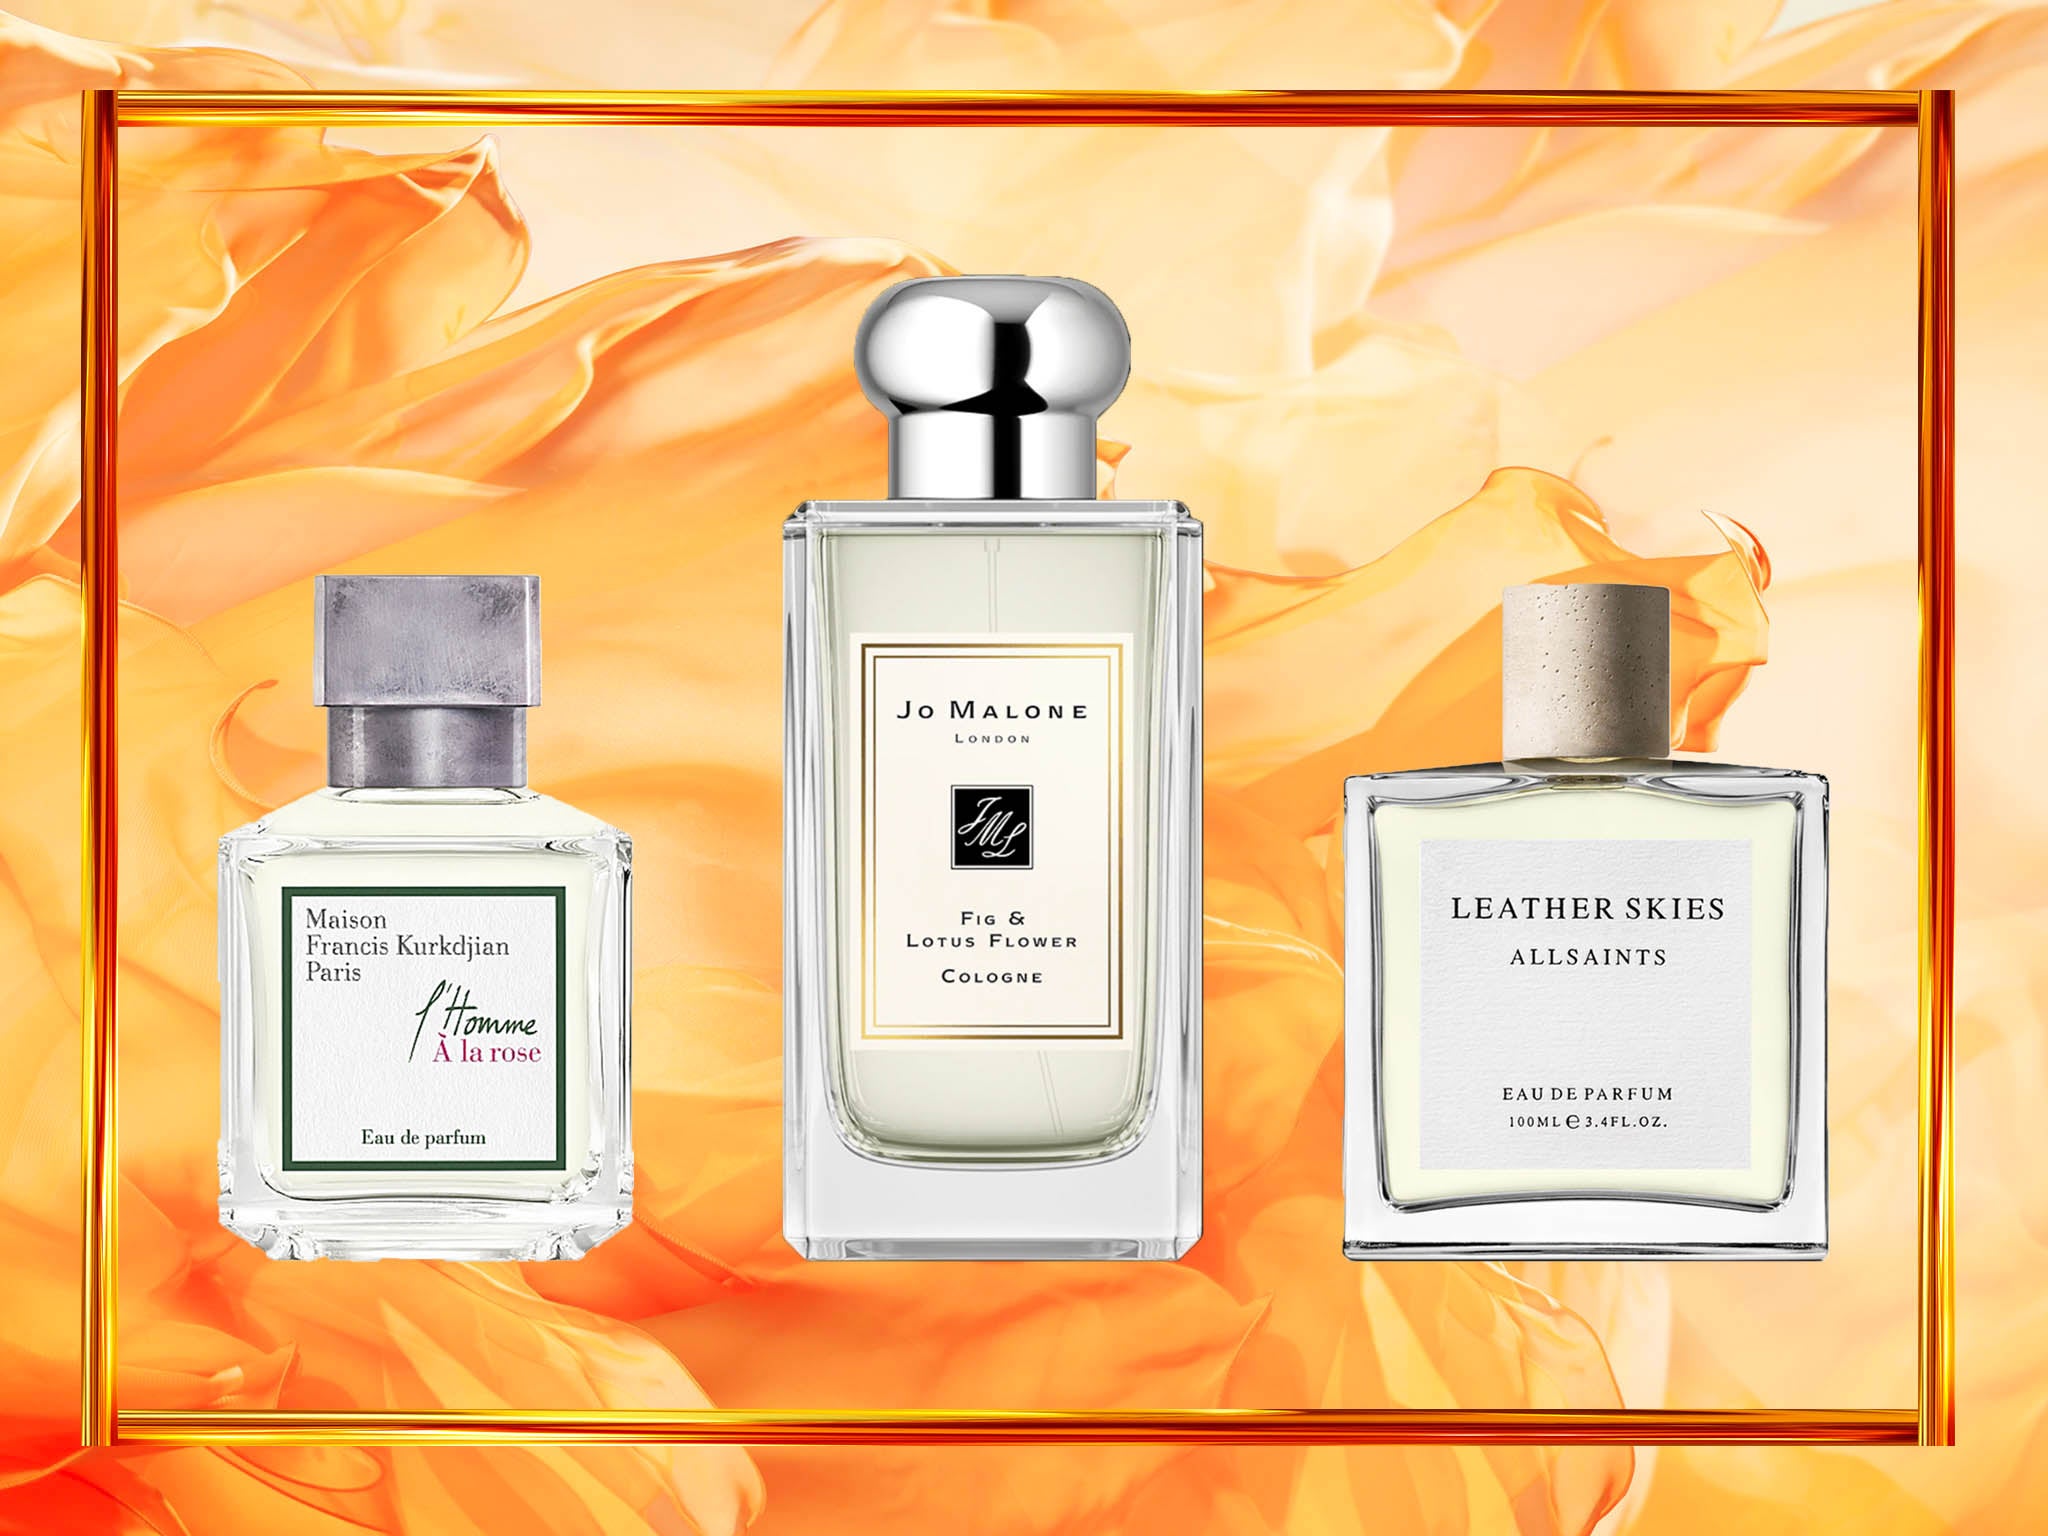 THE ART OF SCENT' with Francis Kurkdjian of Maison Francis